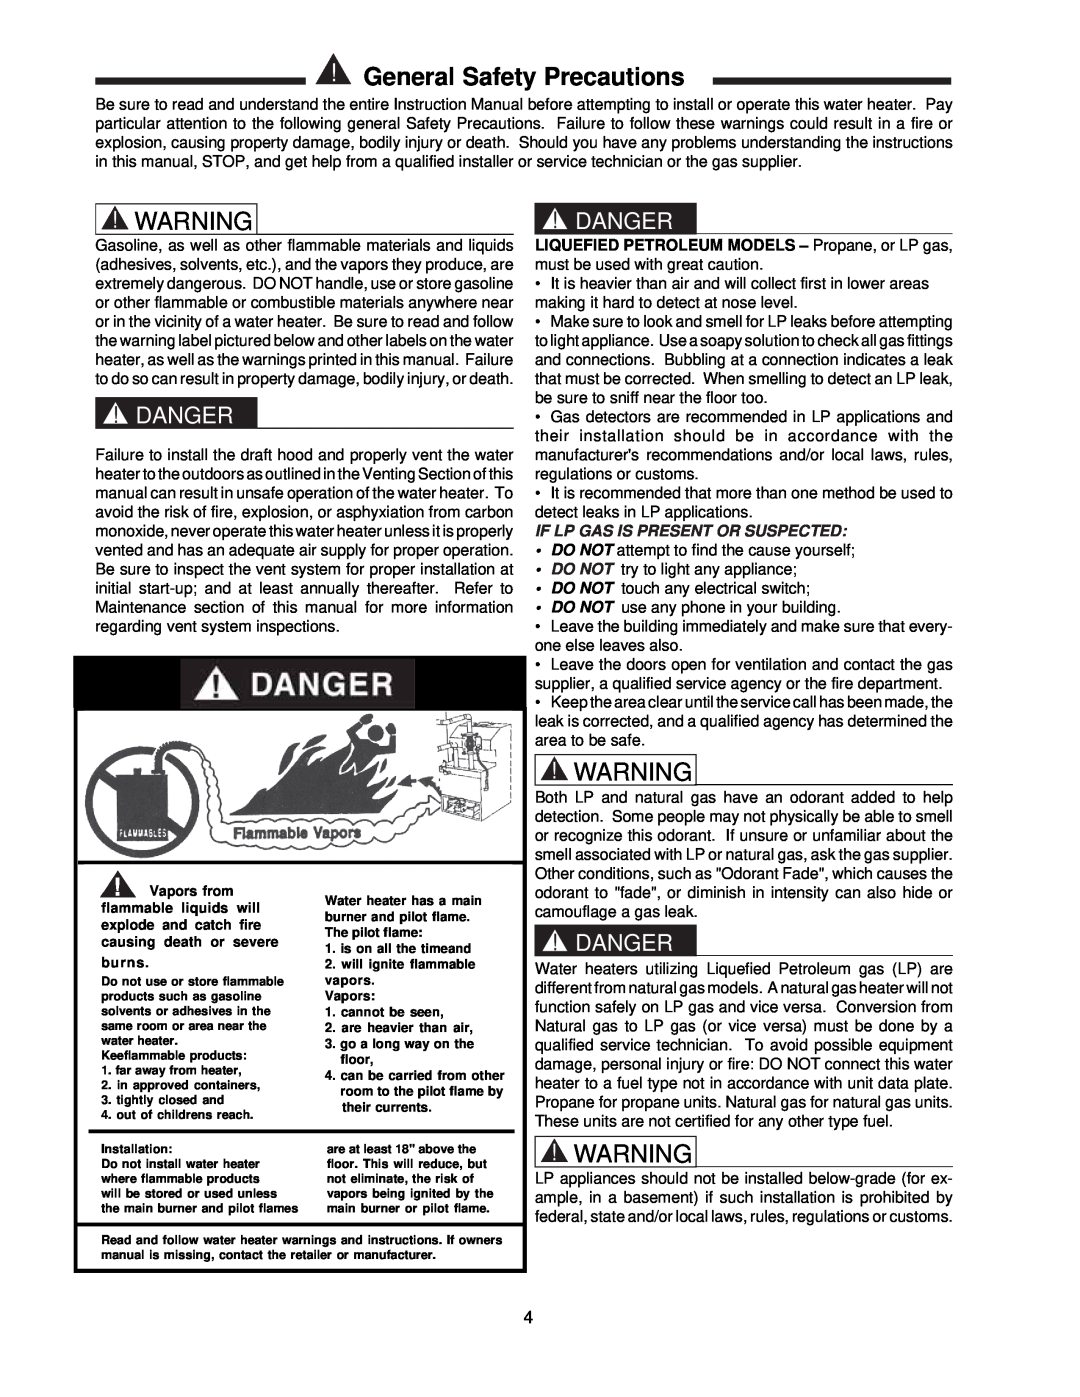 Raypak 260-401 manual General Safety Precautions, Danger, If Lp Gas Is Present Or Suspected 